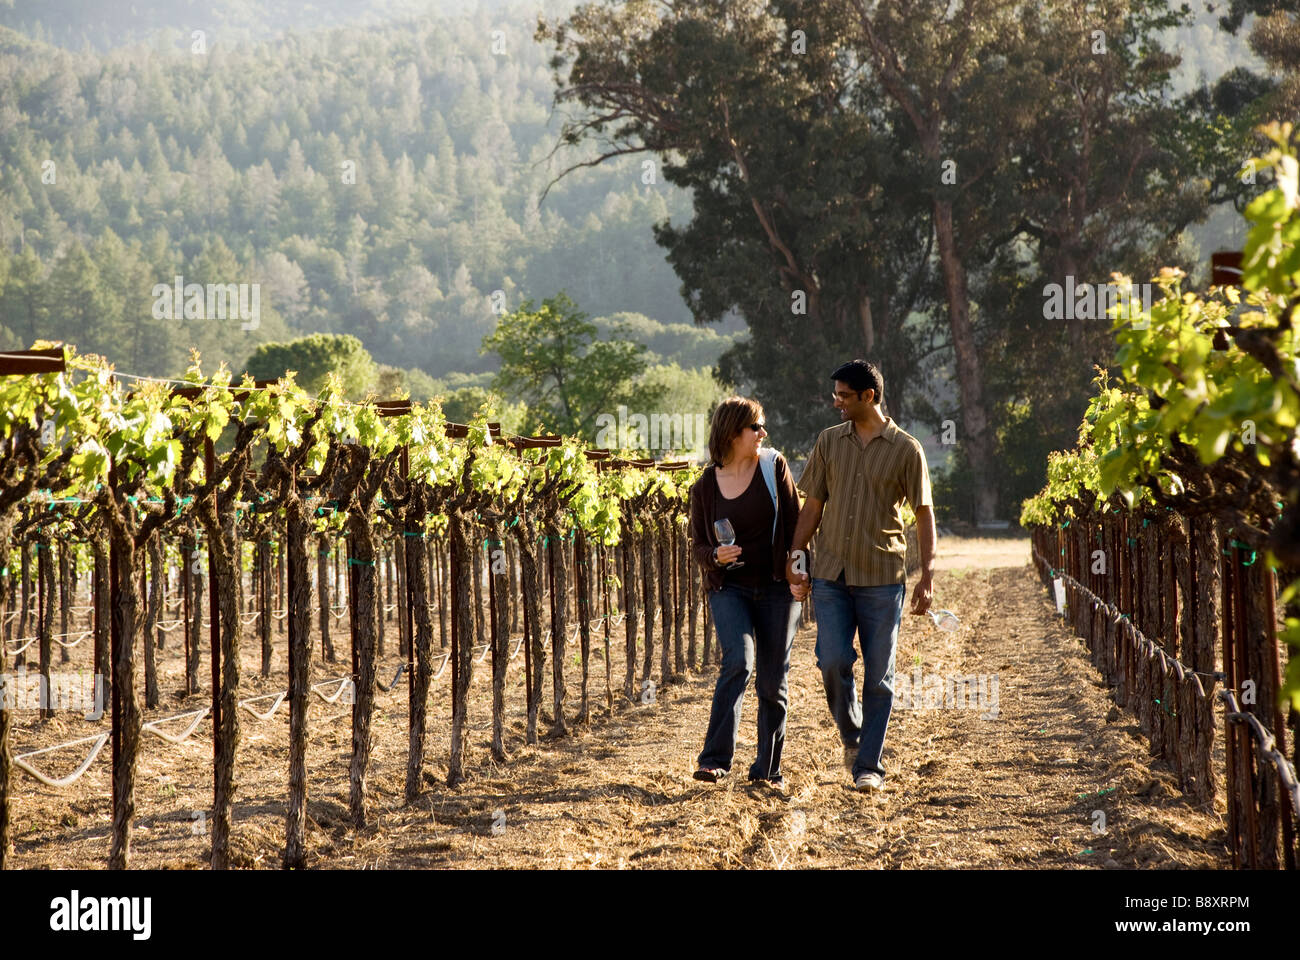 Couple walking in vineyard Banque D'Images